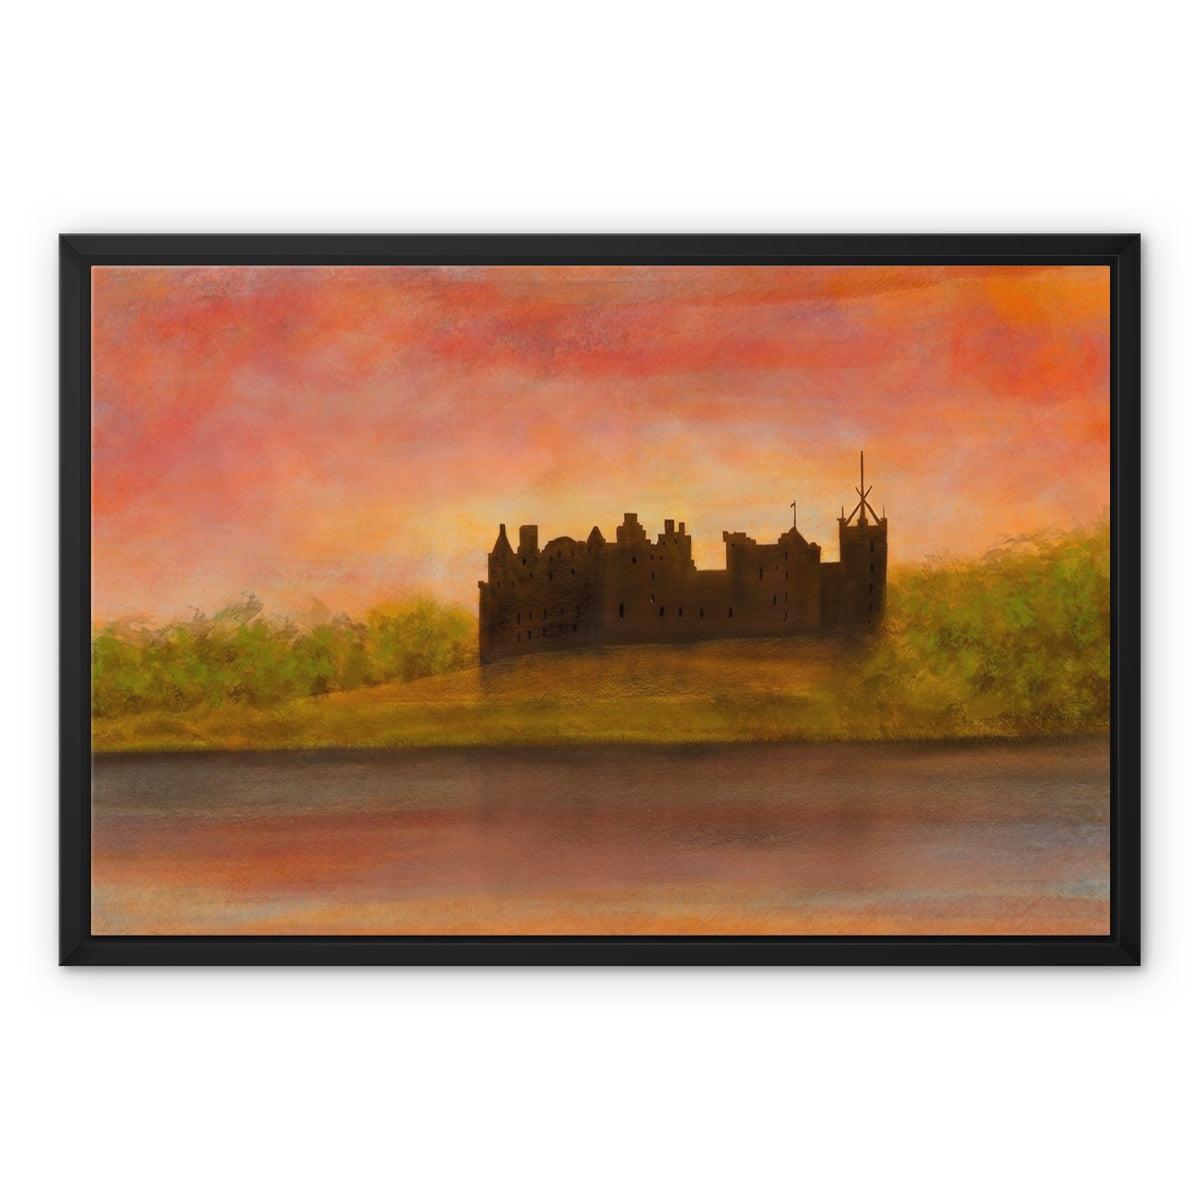 Linlithgow Palace Dusk Painting | Framed Canvas From Scotland-Floating Framed Canvas Prints-Historic & Iconic Scotland Art Gallery-24"x18"-Black Frame-Paintings, Prints, Homeware, Art Gifts From Scotland By Scottish Artist Kevin Hunter